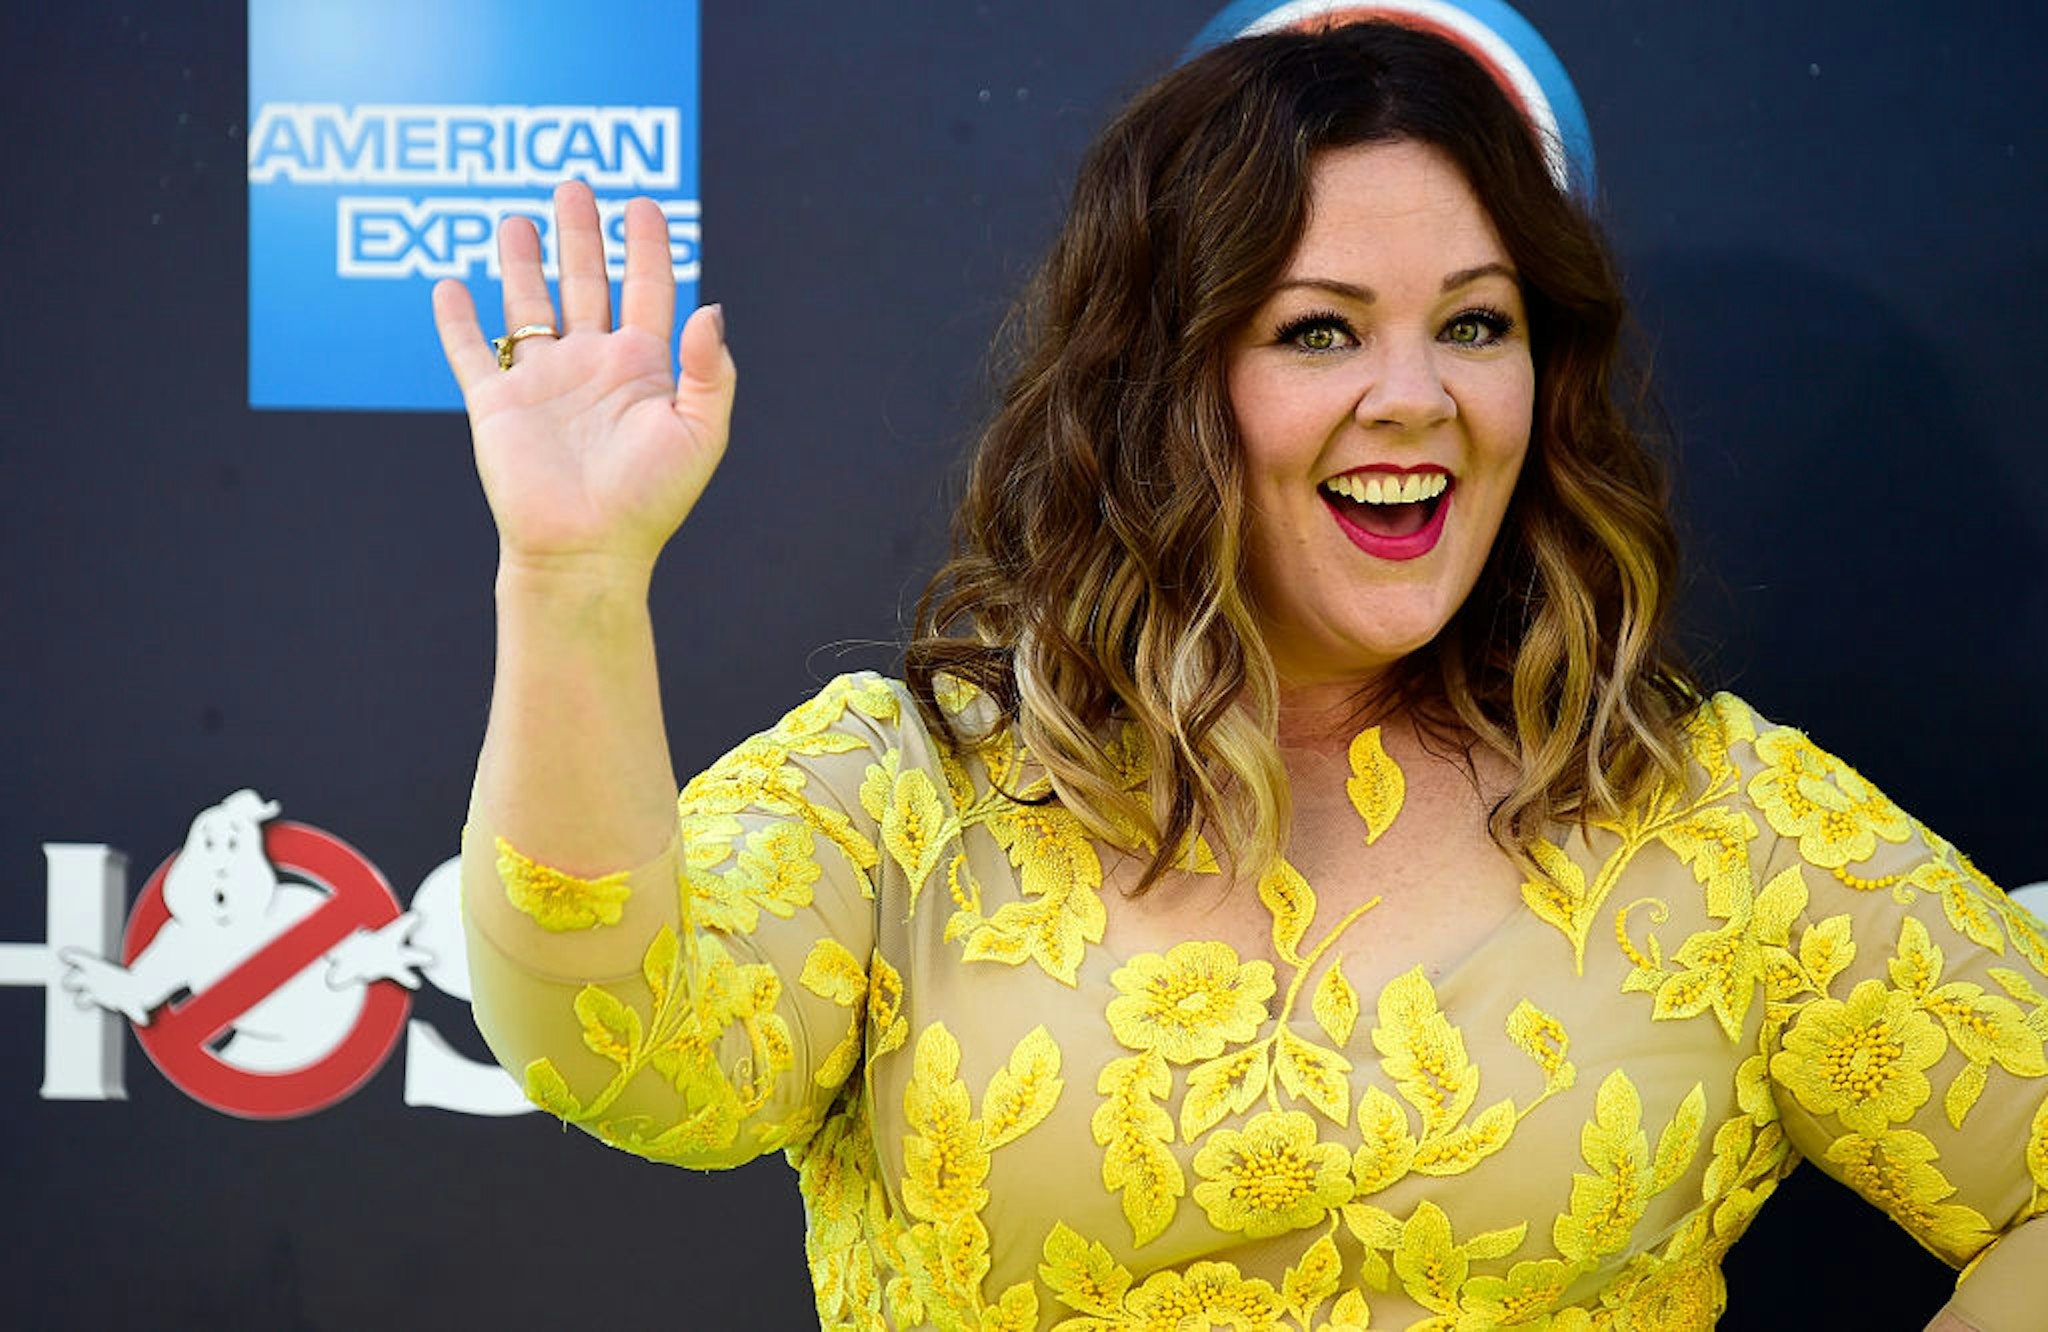 HOLLYWOOD, CA - JULY 09: Actress Melissa McCarthy arrives at the Premiere of Sony Pictures' "Ghostbusters" at TCL Chinese Theatre on July 9, 2016 in Hollywood, California. (Photo by Frazer Harrison/Getty Images)